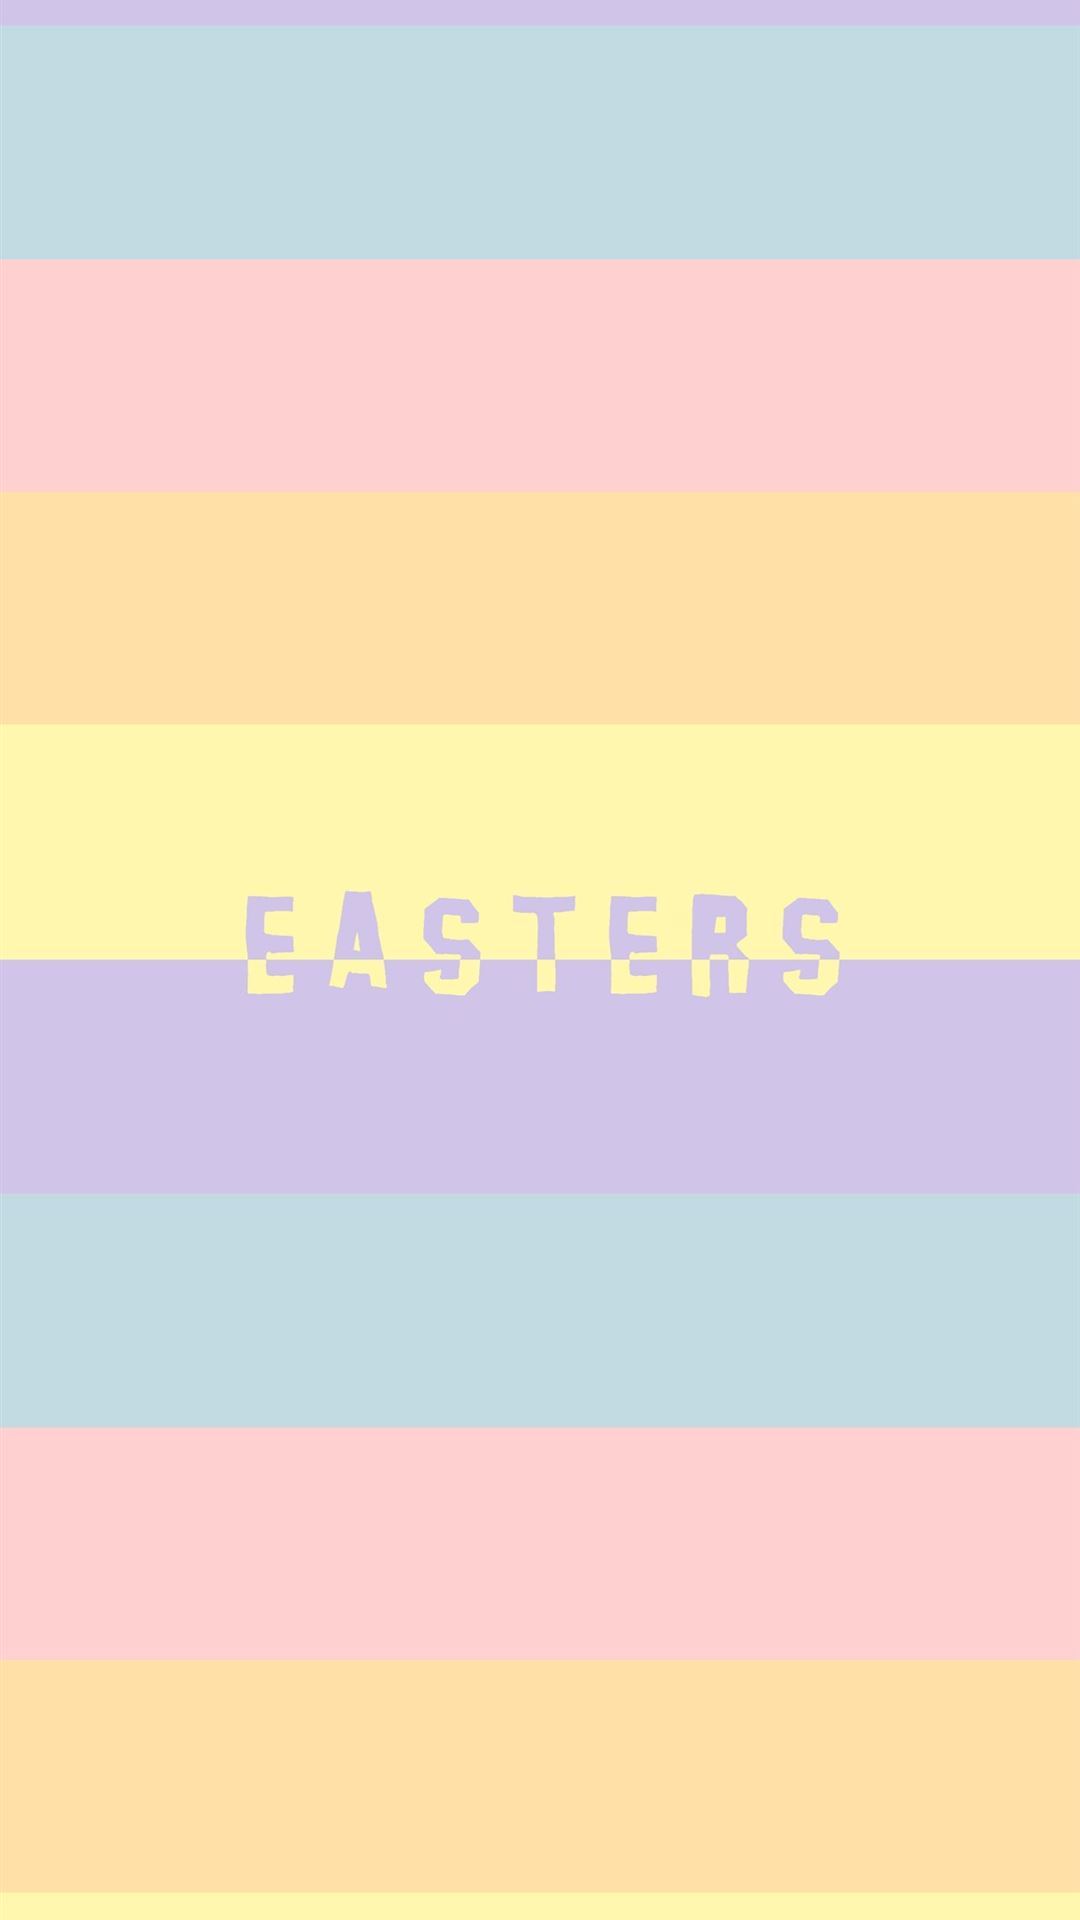 Pastel Easter Top Free Pastel Easter Background A. iPhone Wallpaper Free Download